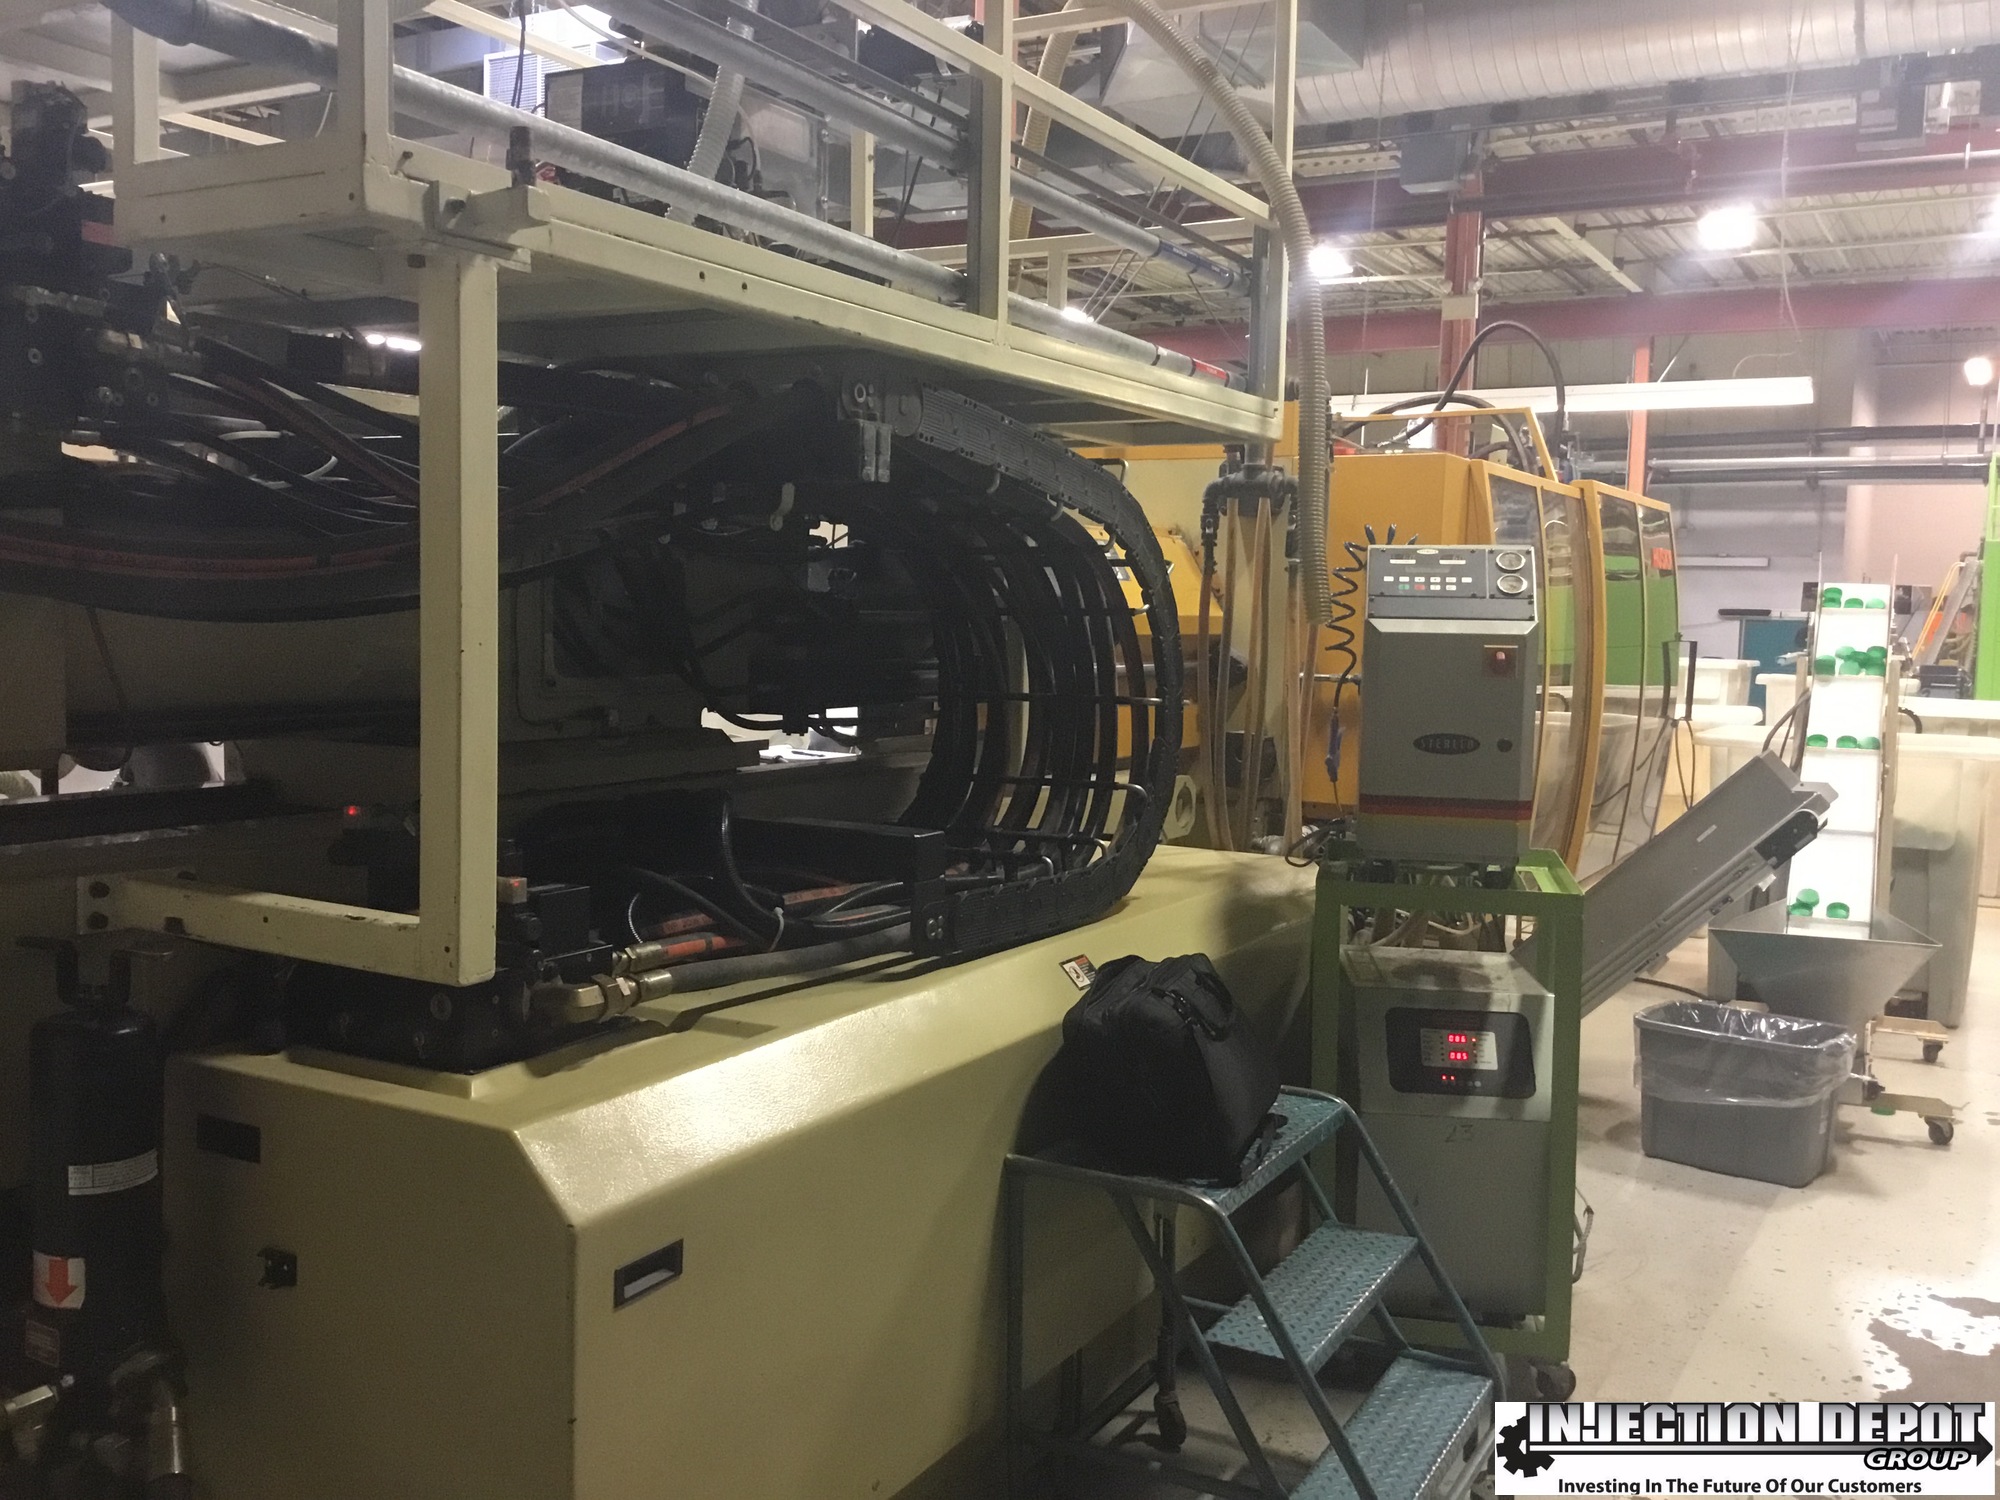 1999 HUSKY G300 RS85/70 Horizontal Injection Moulding Machines | INJECTION DEPOT GROUP